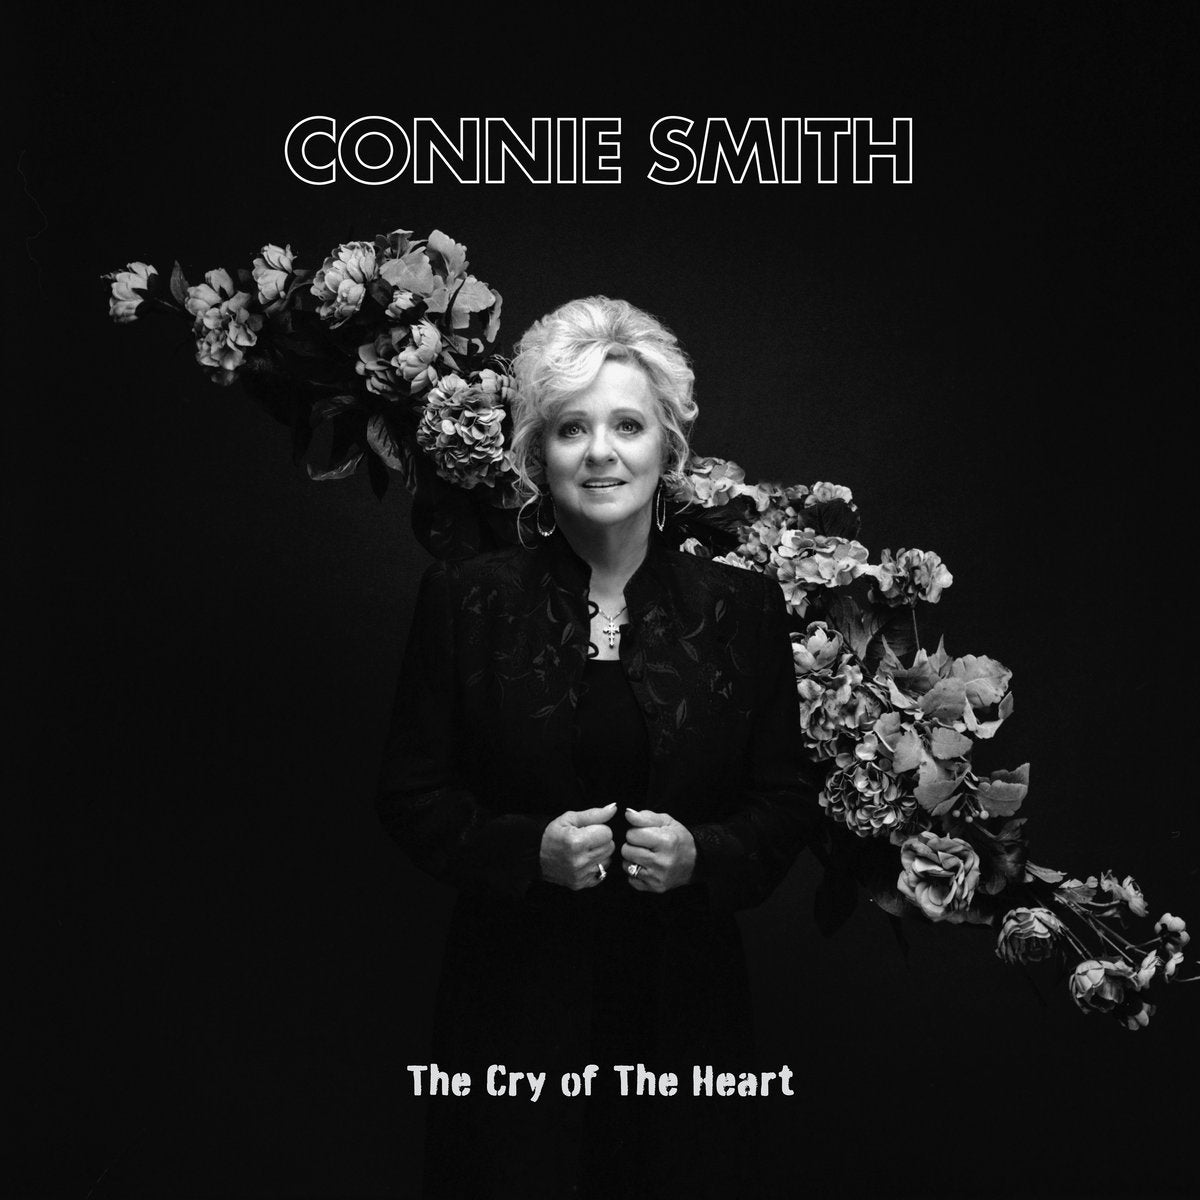 Smith, Connie – The Cry of the Heart [WHITE VINYL] – New LP